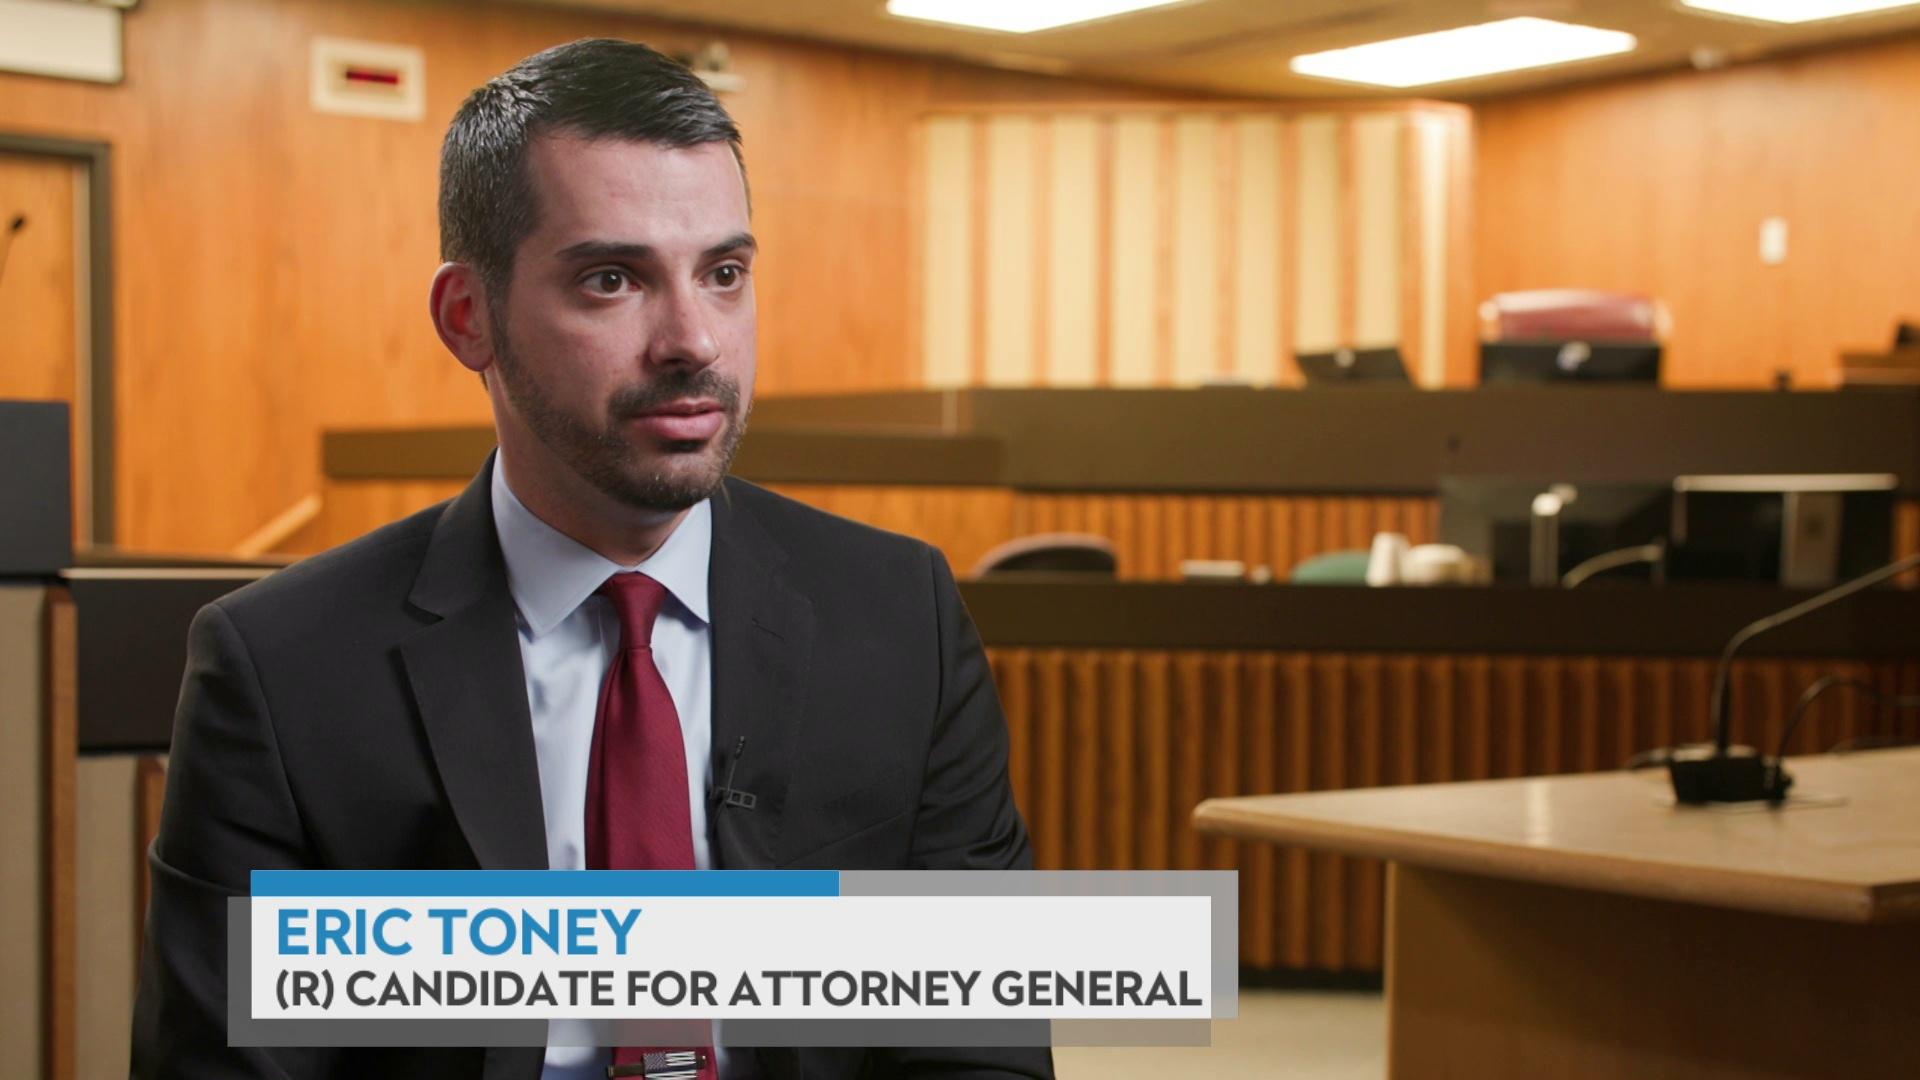 Eric Toney on public safety and the attorney general office